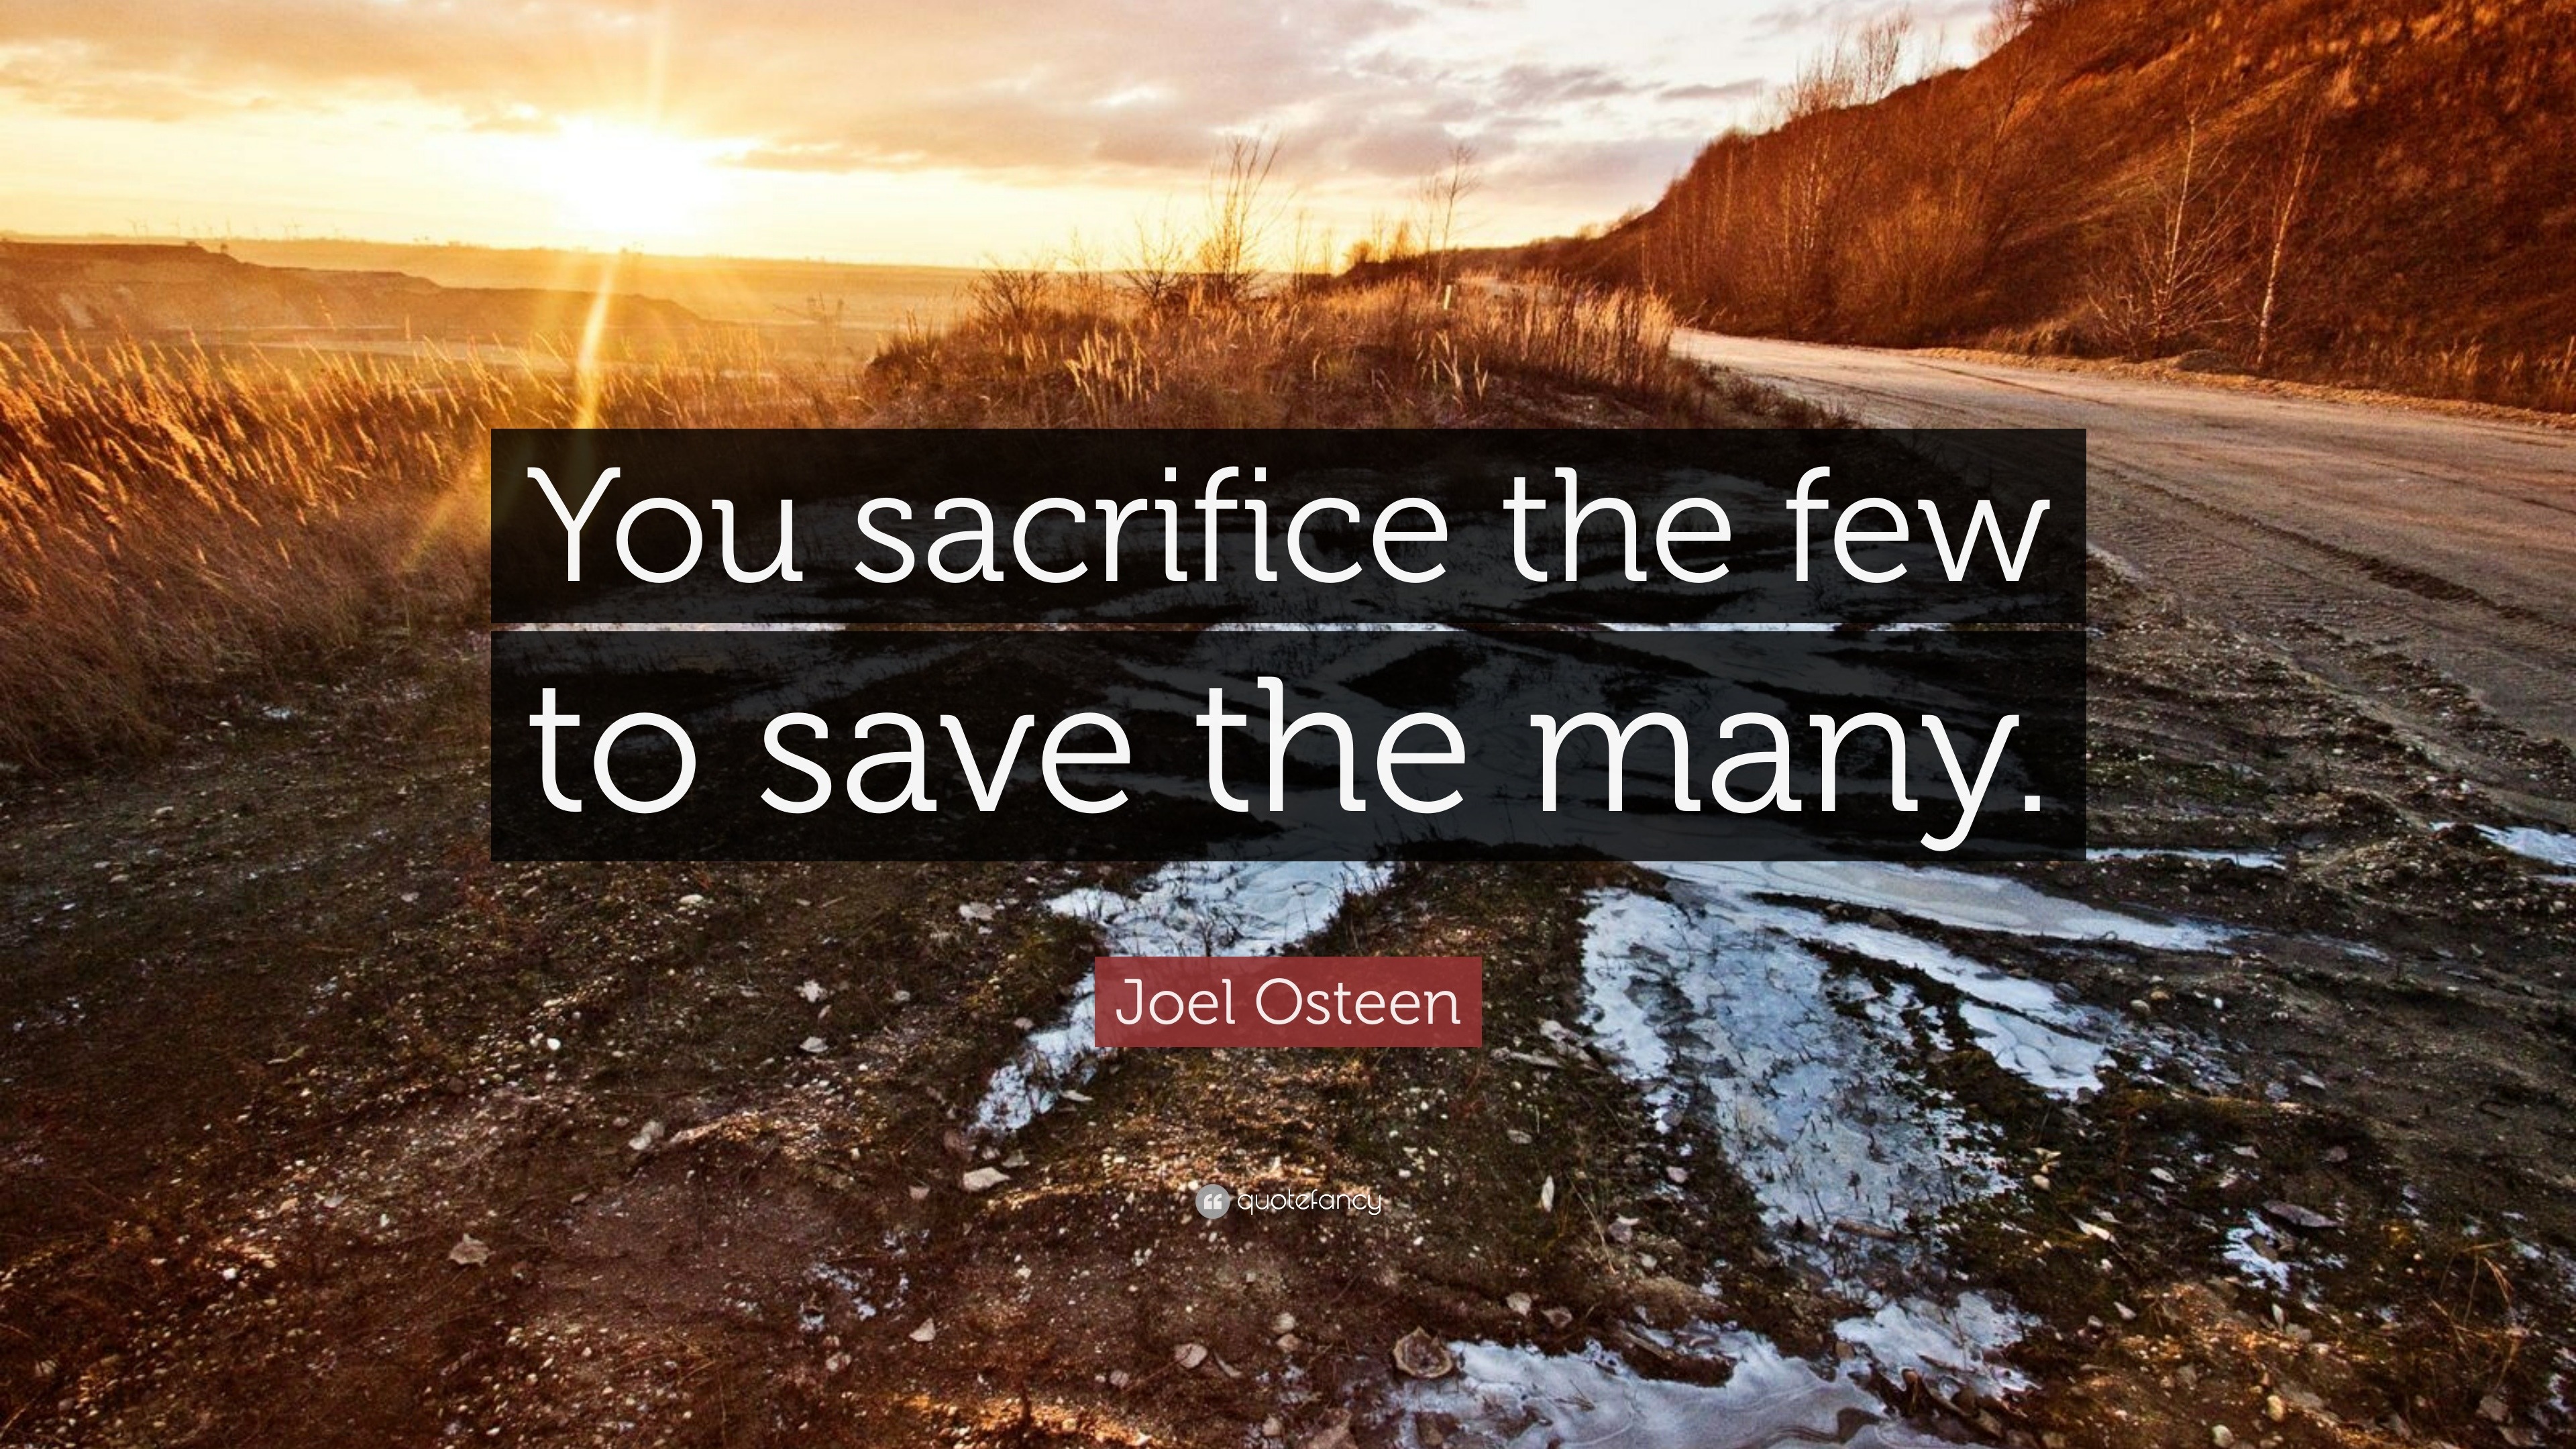 Joel Osteen Quote “You sacrifice the few to save the many ”